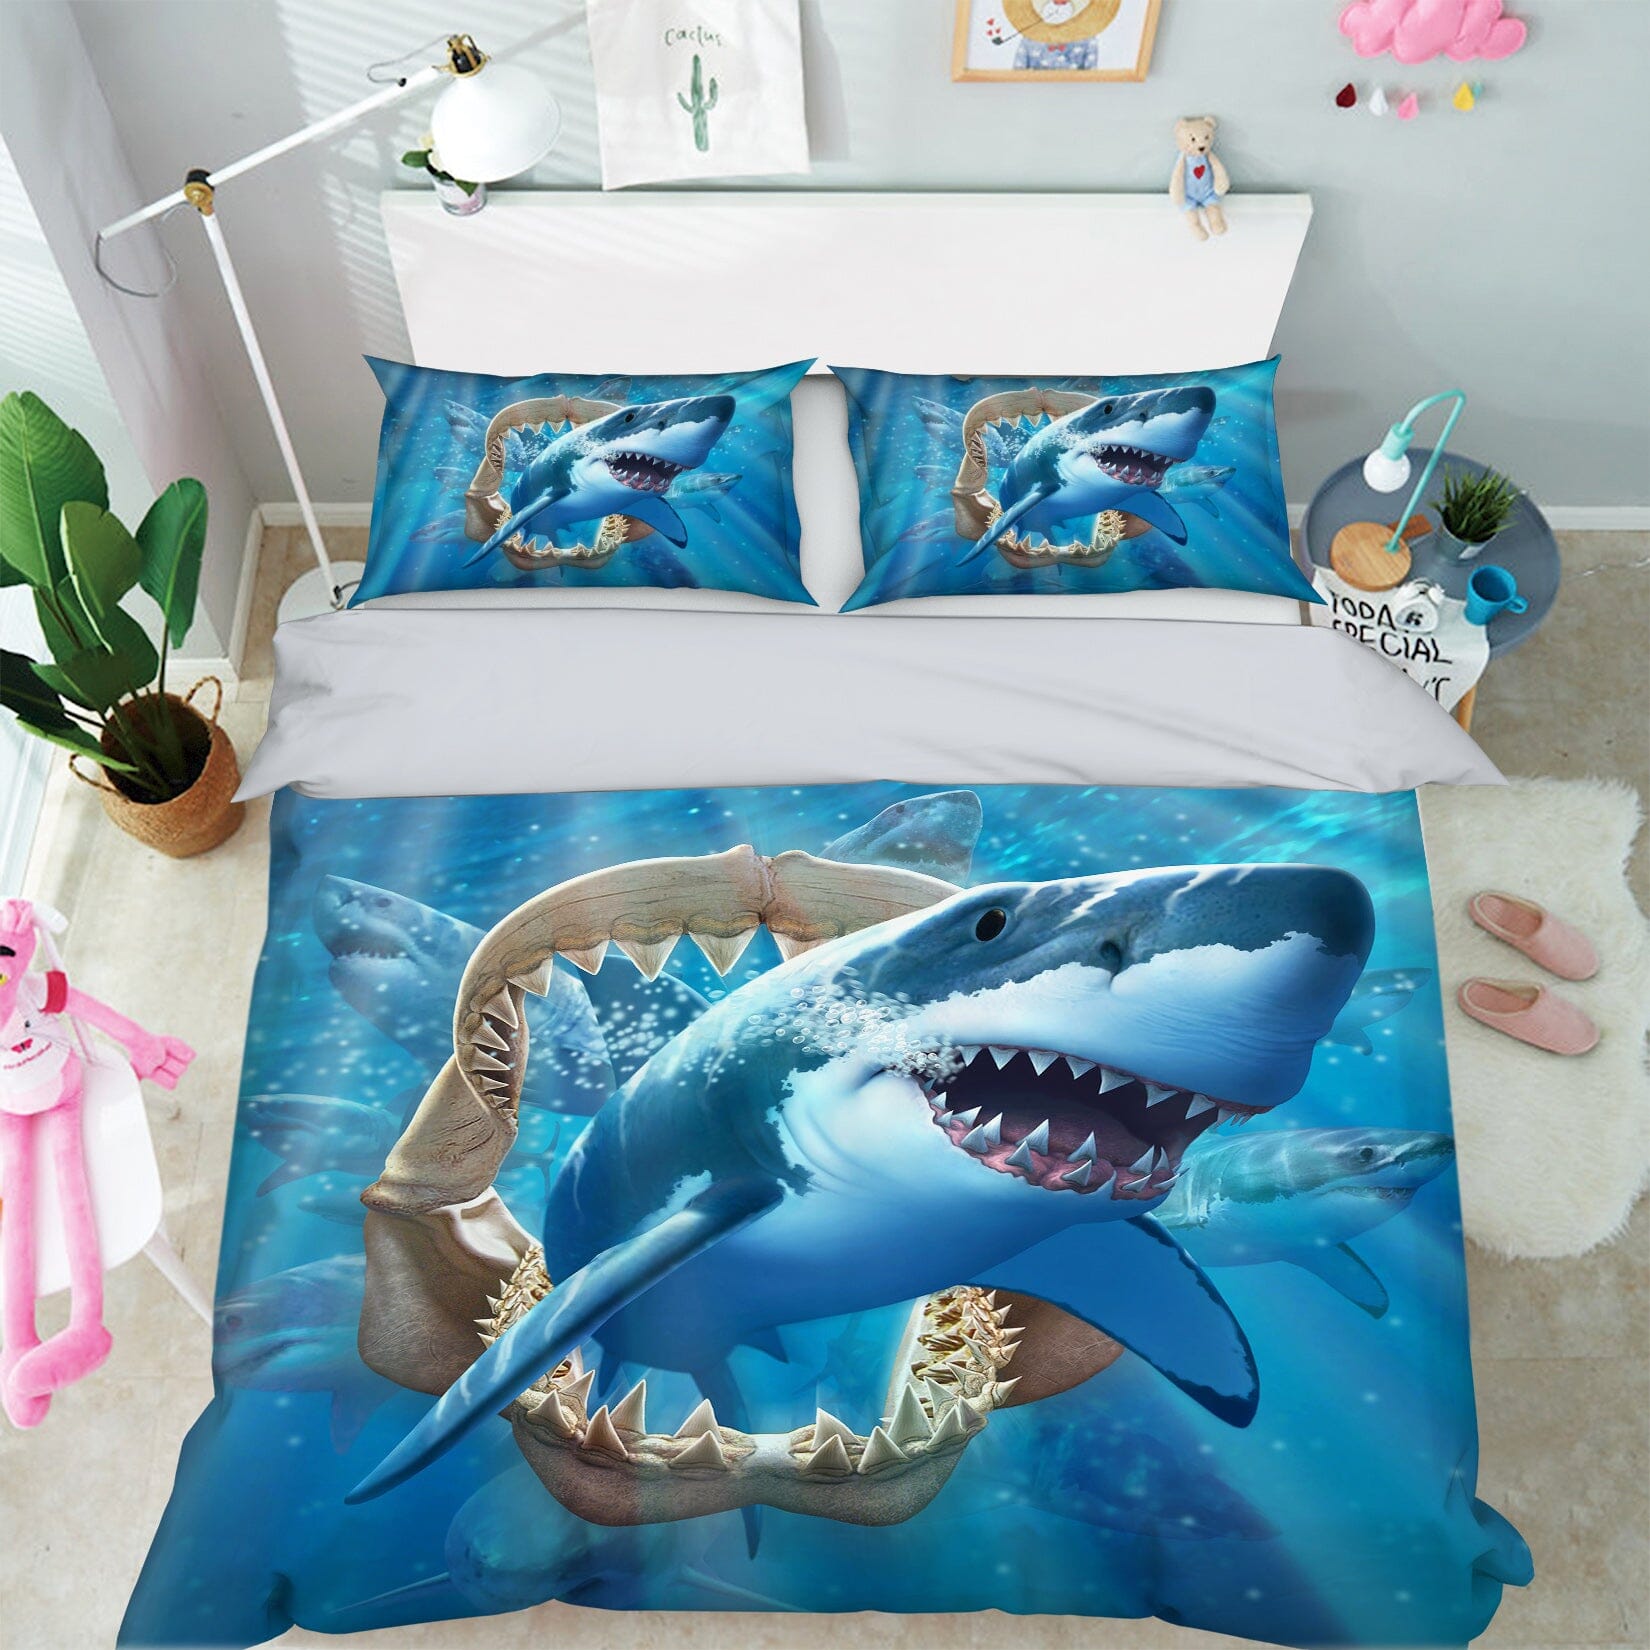 3D Great White Shark 2123 Jerry LoFaro bedding Bed Pillowcases Quilt Quiet Covers AJ Creativity Home 